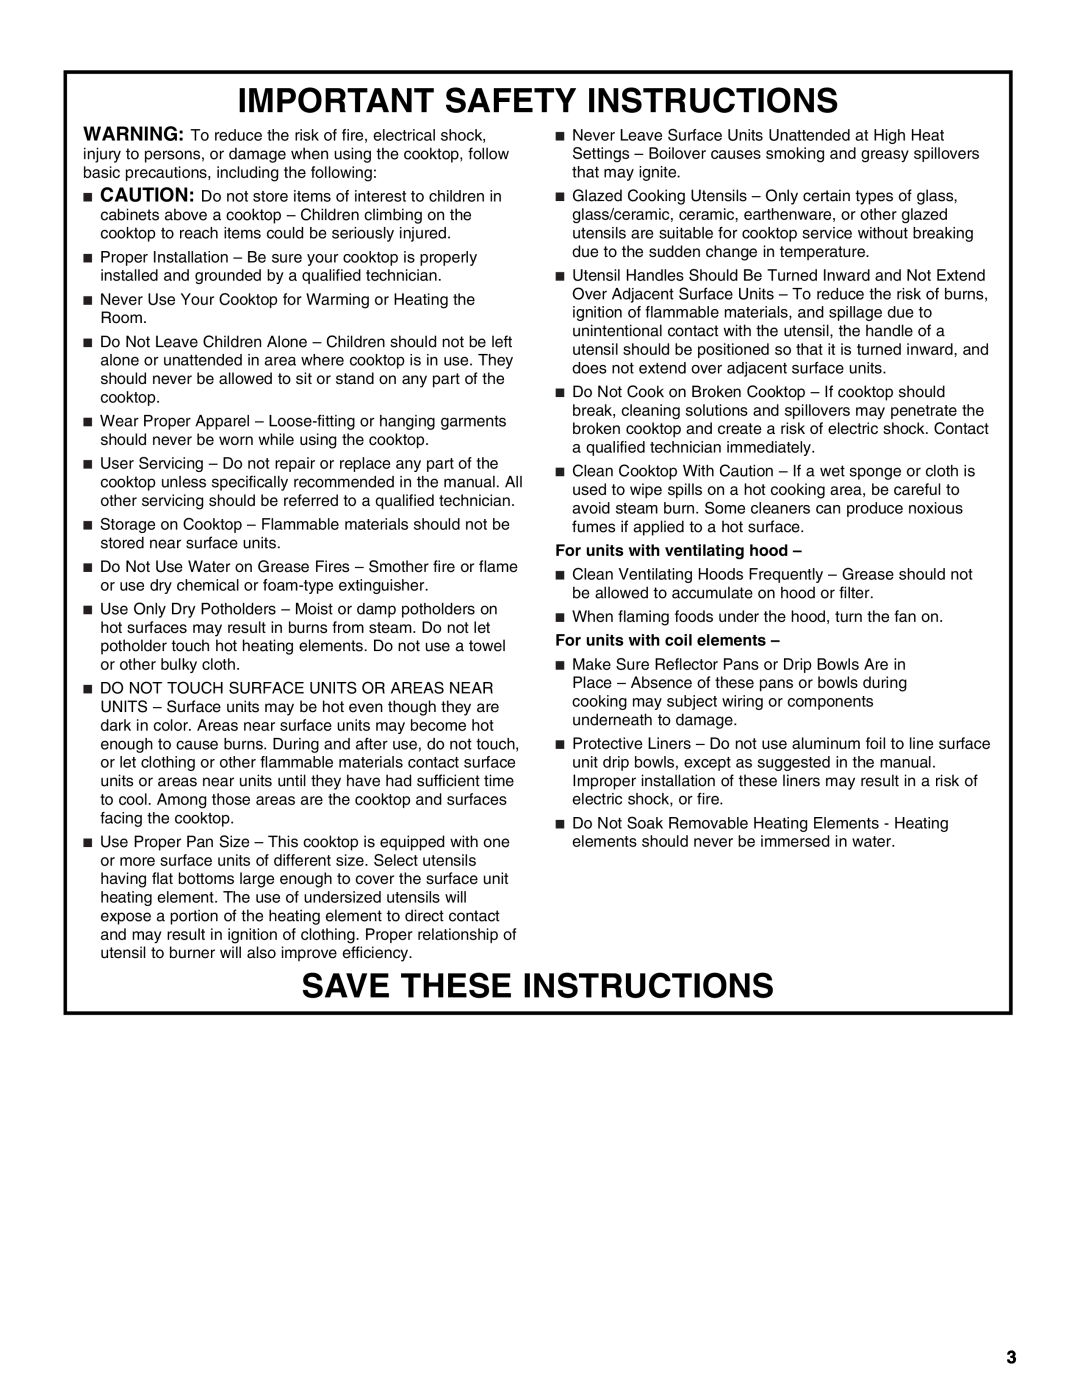 Whirlpool W10162166A manual Important Safety Instructions, Save These Instructions, For units with ventilating hood 